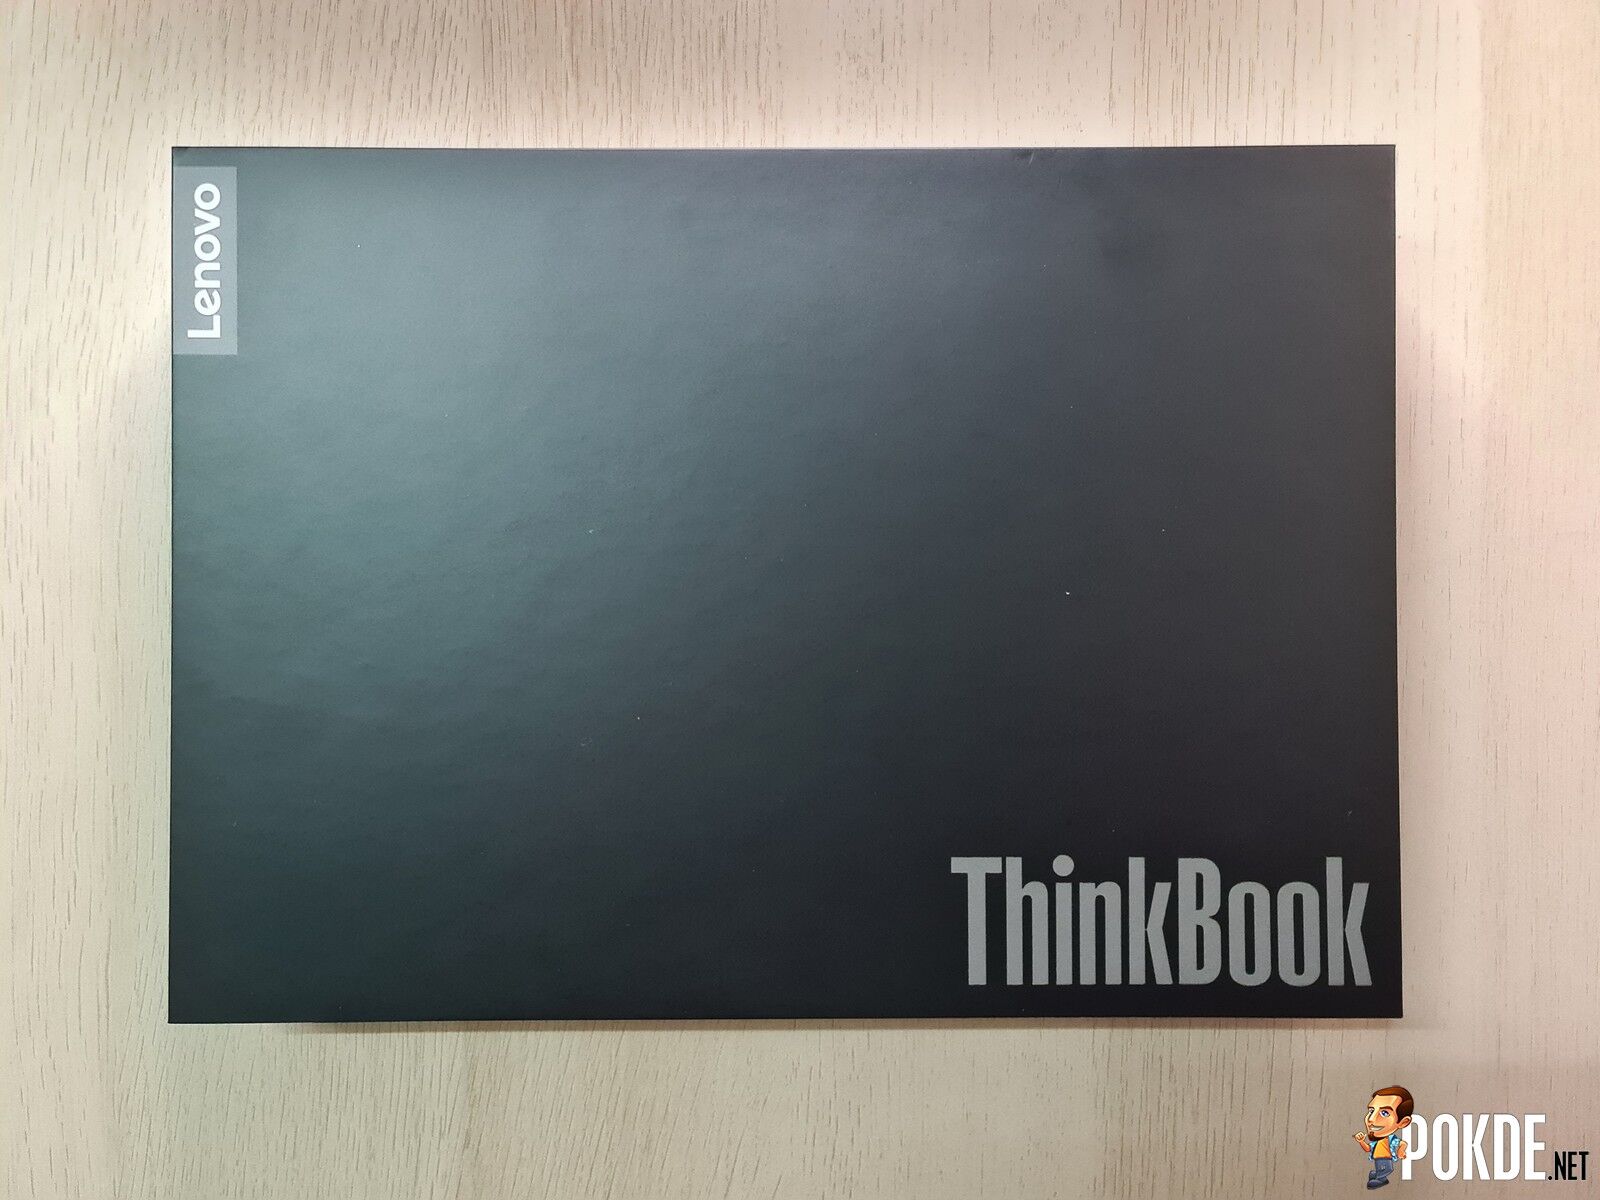 Lenovo ThinkBook Plus Review - Innovation For A Better Tomorrow 19